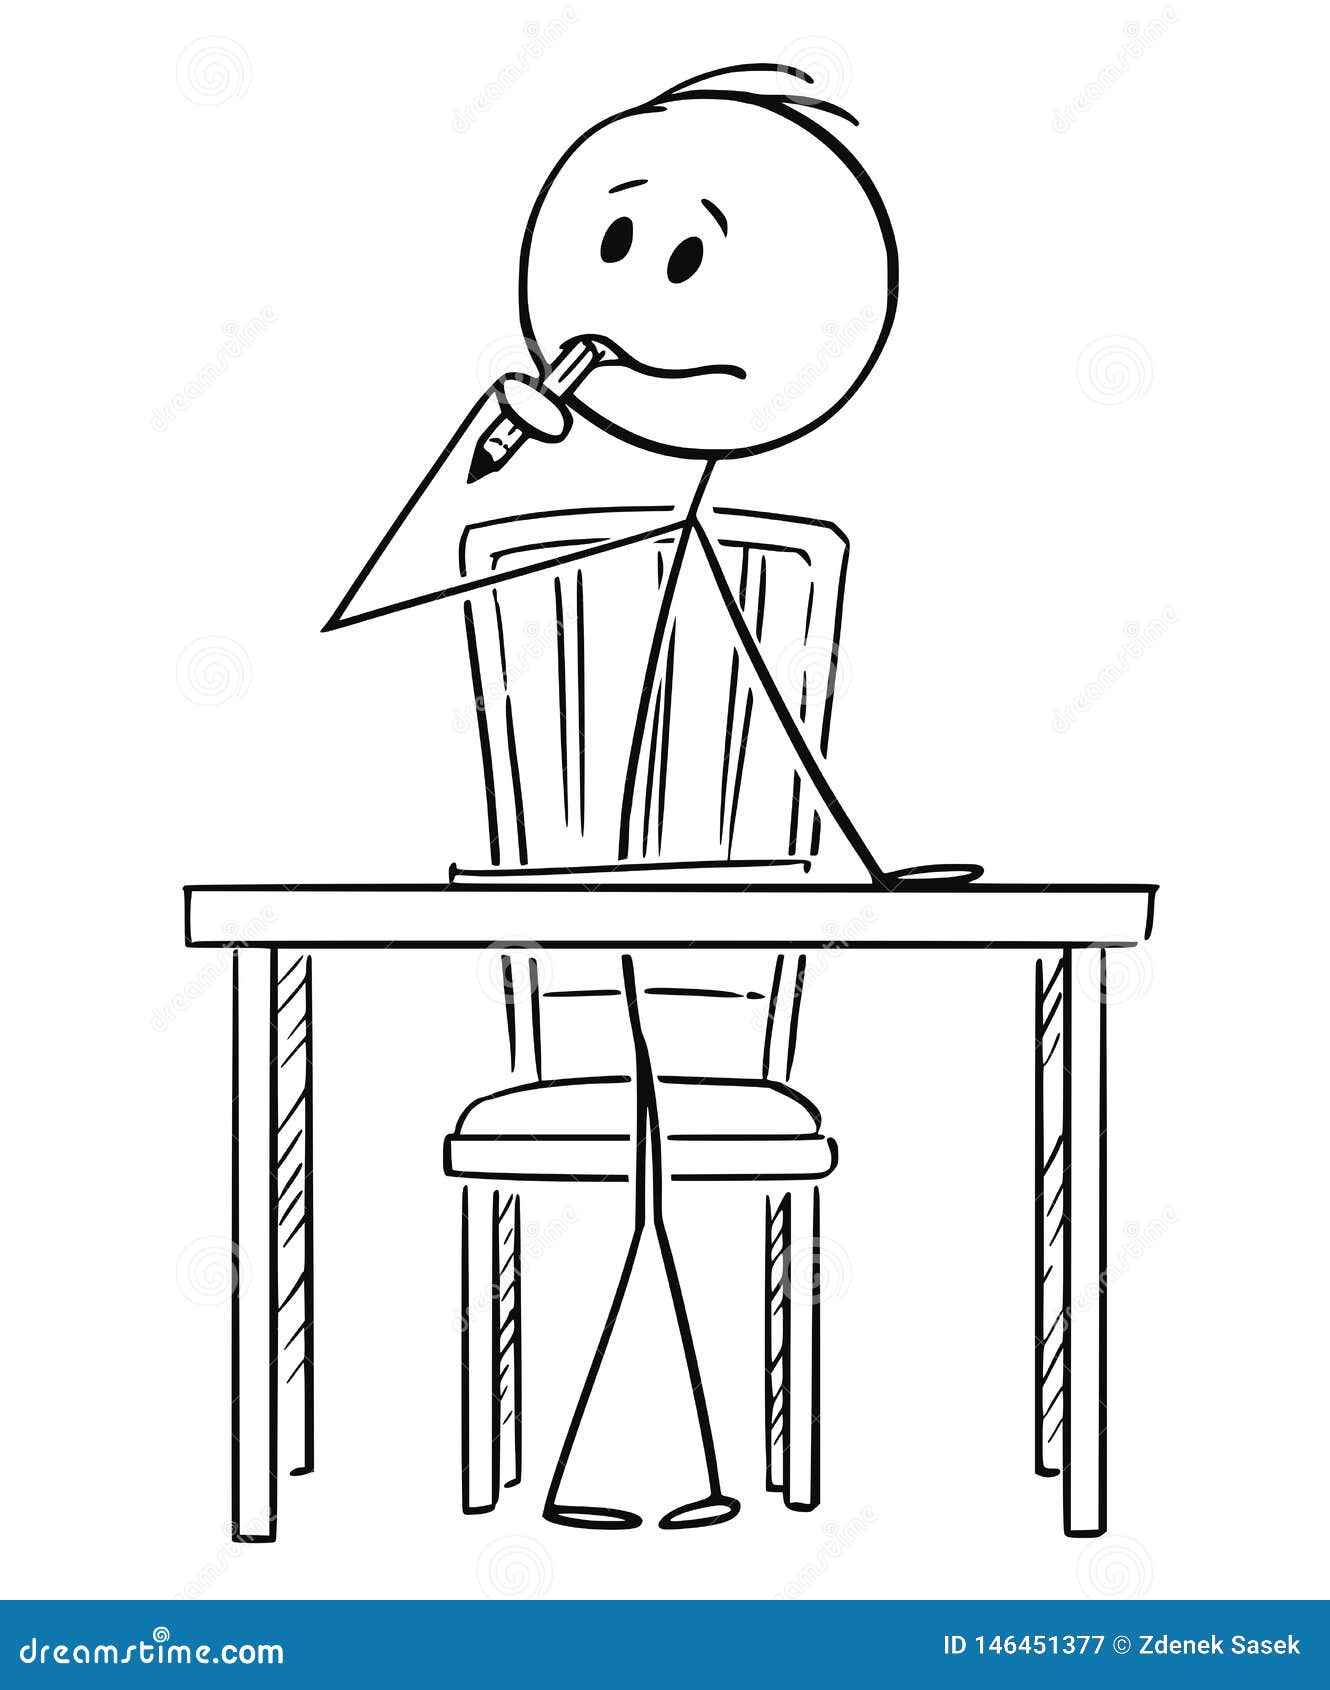 Cartoon Of Man Sitting Behind Desk And Thinking With Pencil In